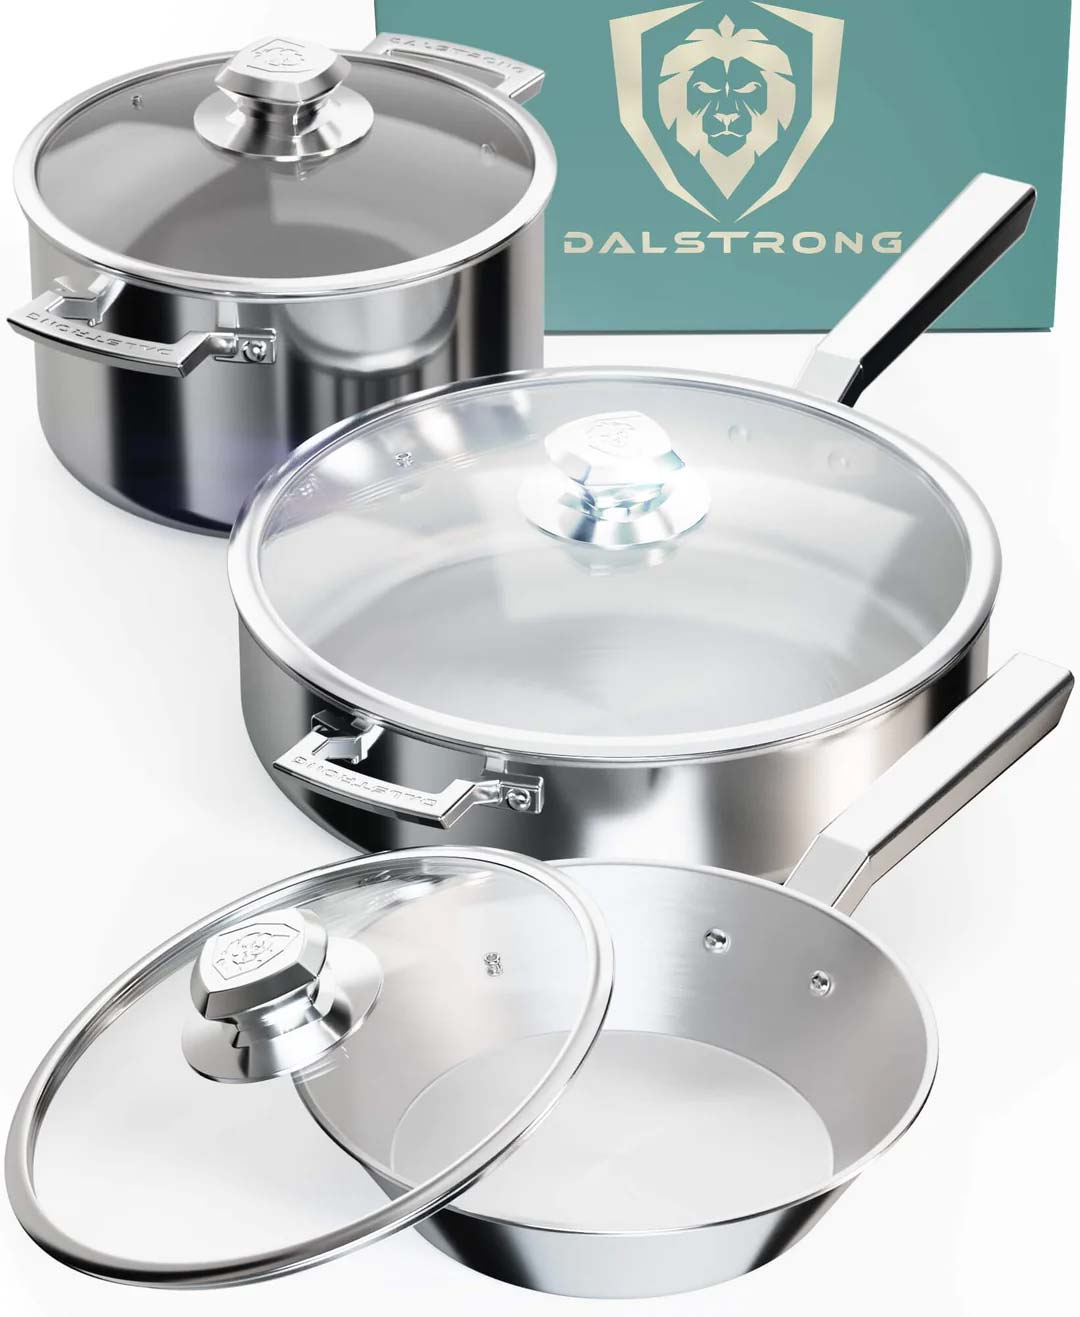 Dalstrong oberon series 6 piece cookware set in front of it's premium packaging.